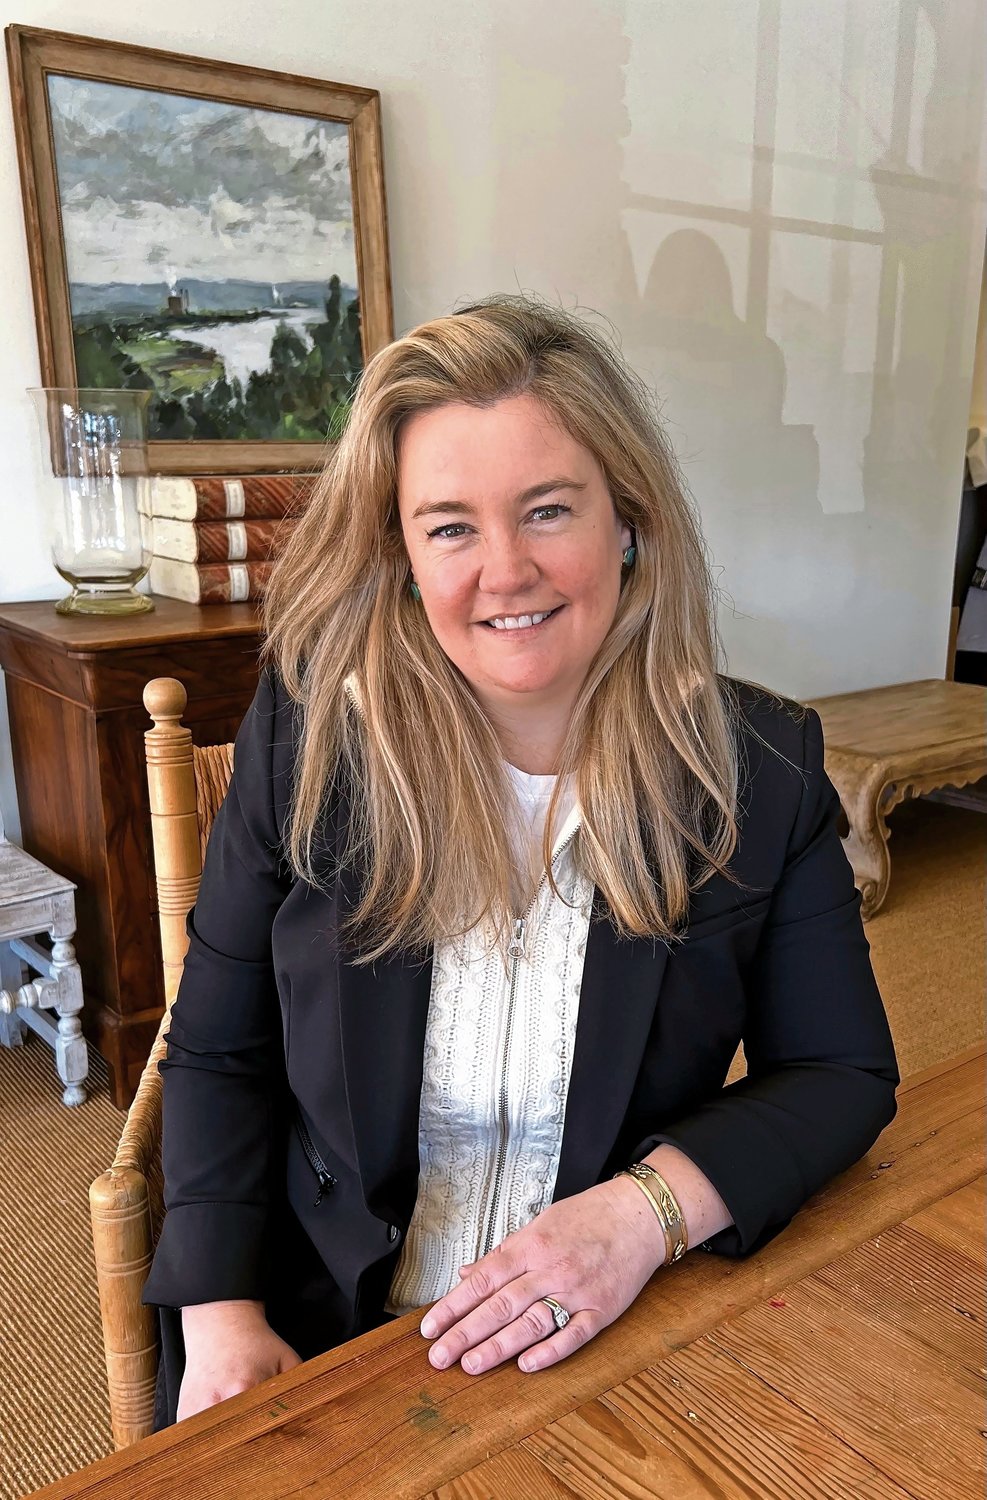 Julia Vaughn began her tenure as president of the Community Foundation at the beginning of the year, and is looking forward to continuing to help nonprofits in Oyster Bay.